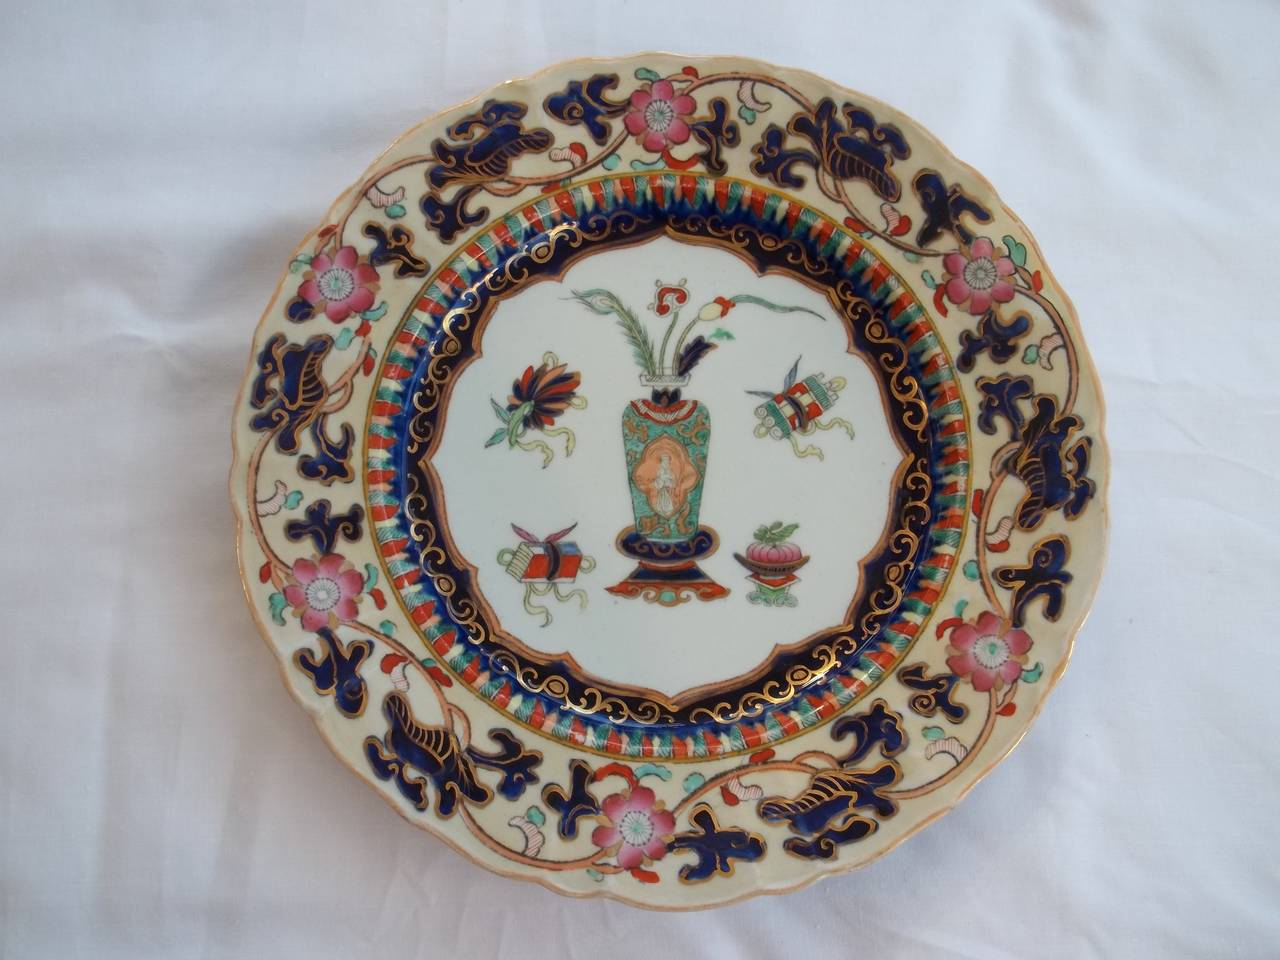 This is a good Pair of Ironstone Dinner Plates made by Mason's Ironstone, Lane Delph, England, Circa 1840.

The plates are beautifully and boldly decorated in the Chinese Antiquities pattern, sometimes known as the Vase and Symbol pattern. This